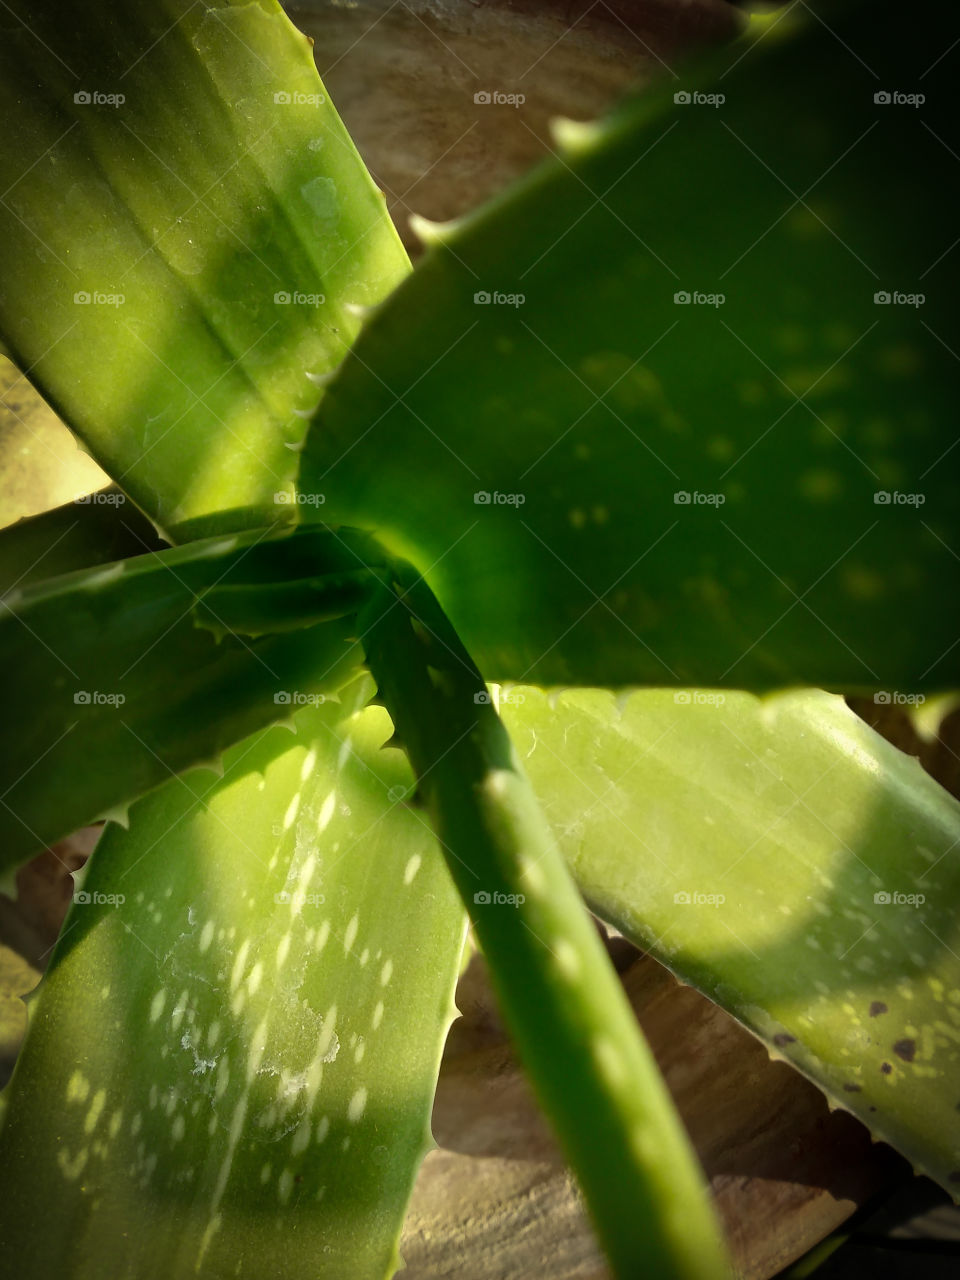 Title- Nothing can dim the light that shines from within
Description- Aloe vera plant,light,morning light,closeup
Location- West Bengal,India